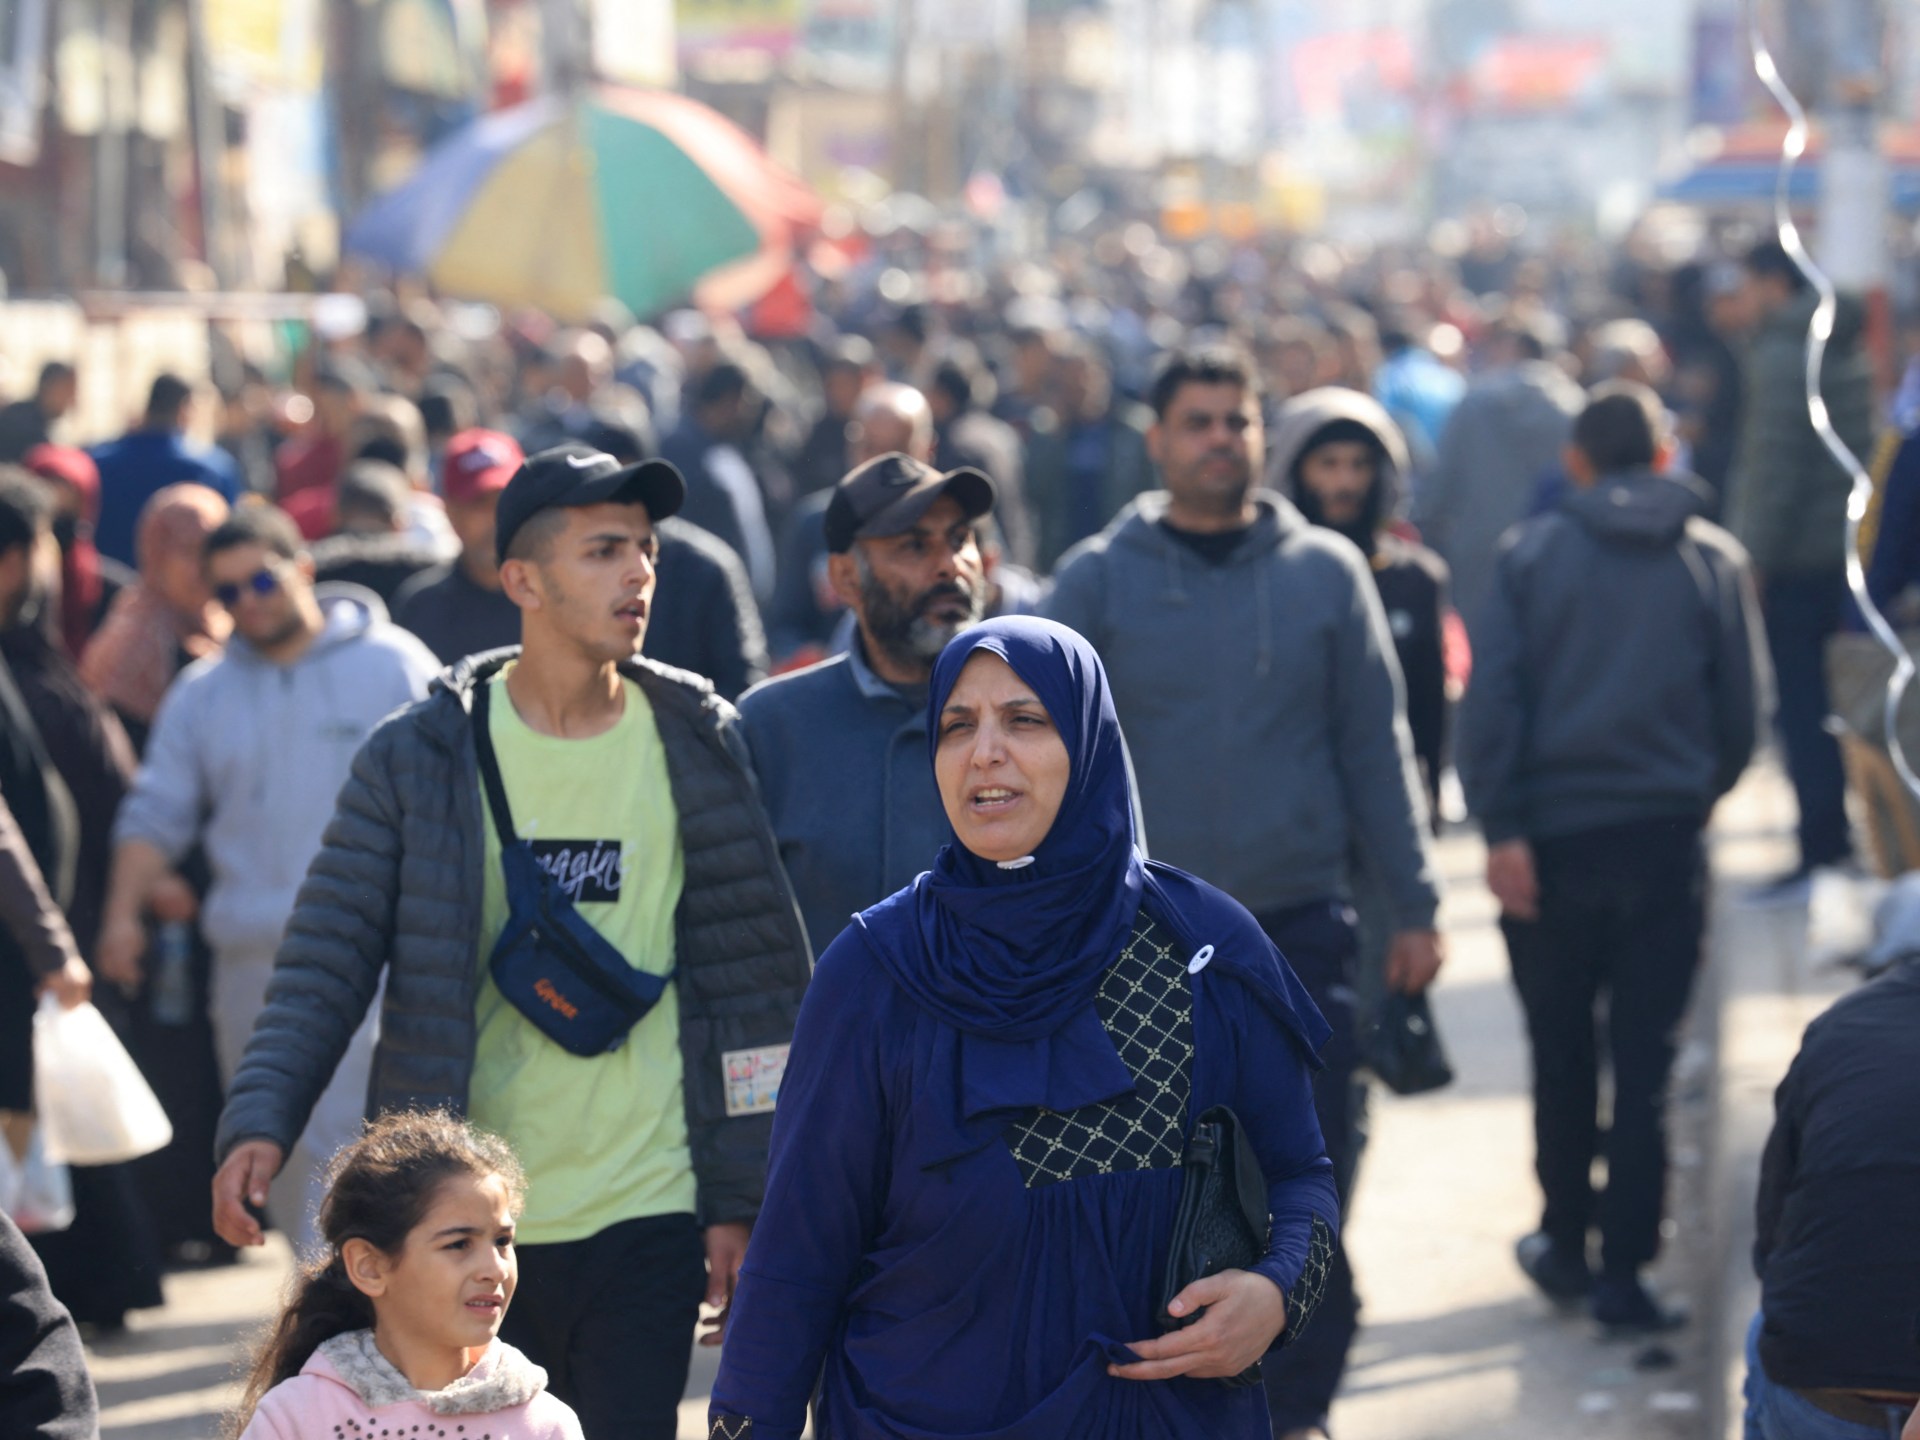 Palestinians displaced to south Gaza’s overcrowded areas living on streets | Israel-Palestine conflict News